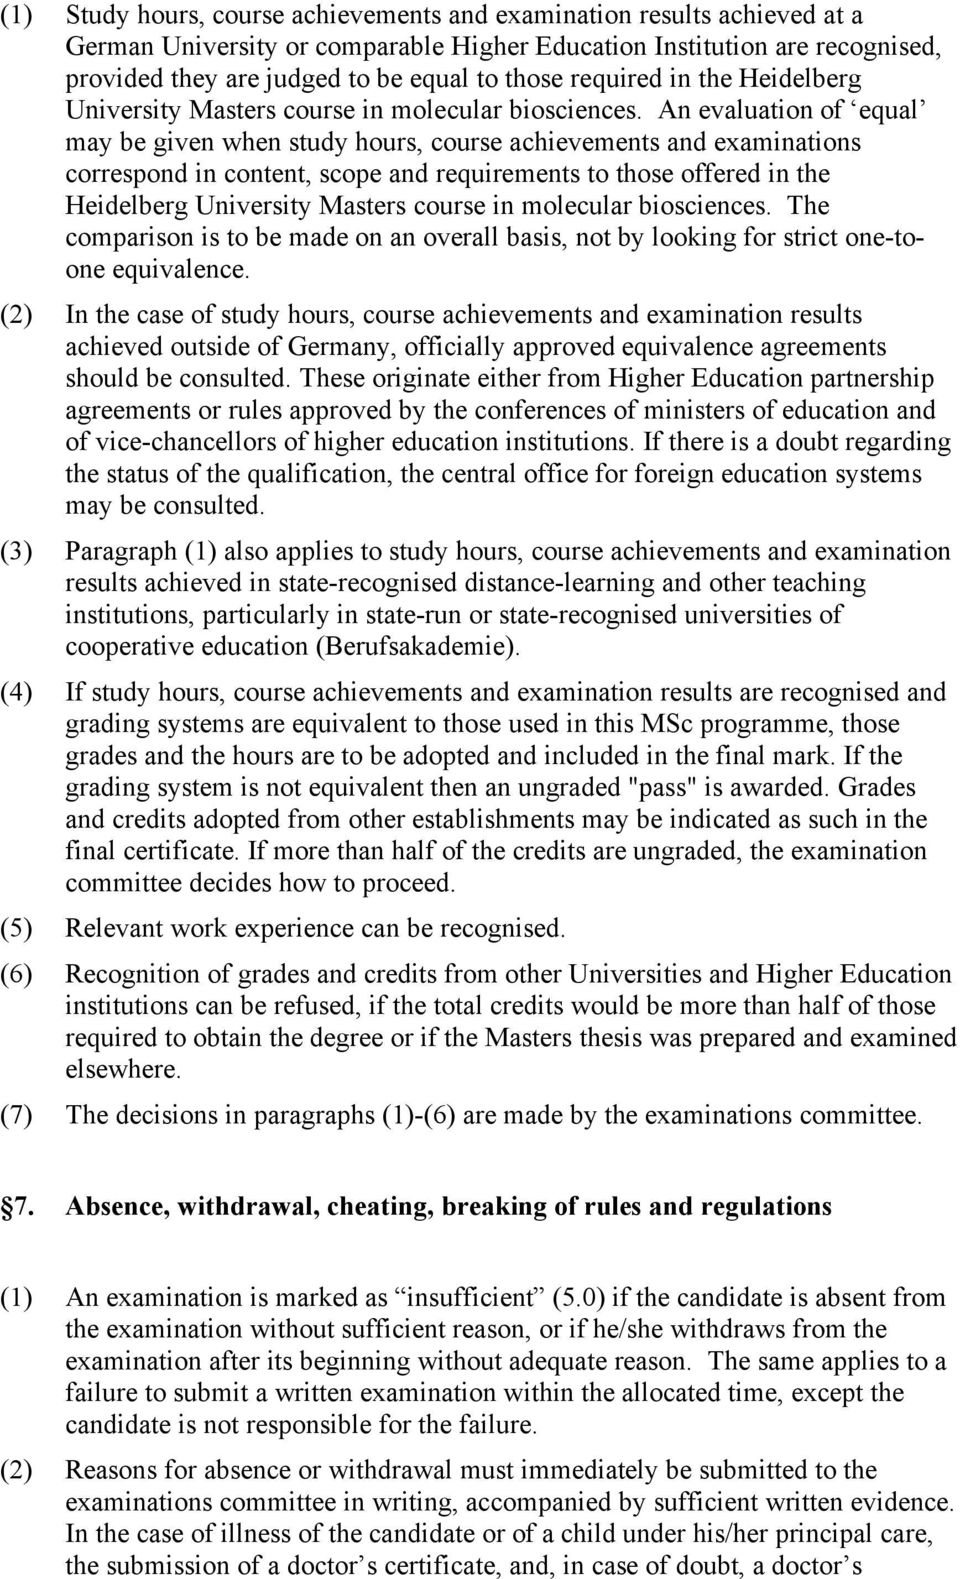 An evaluation of equal may be given when study hours, course achievements and examinations correspond in content, scope and requirements to those offered in the Heidelberg University Masters course